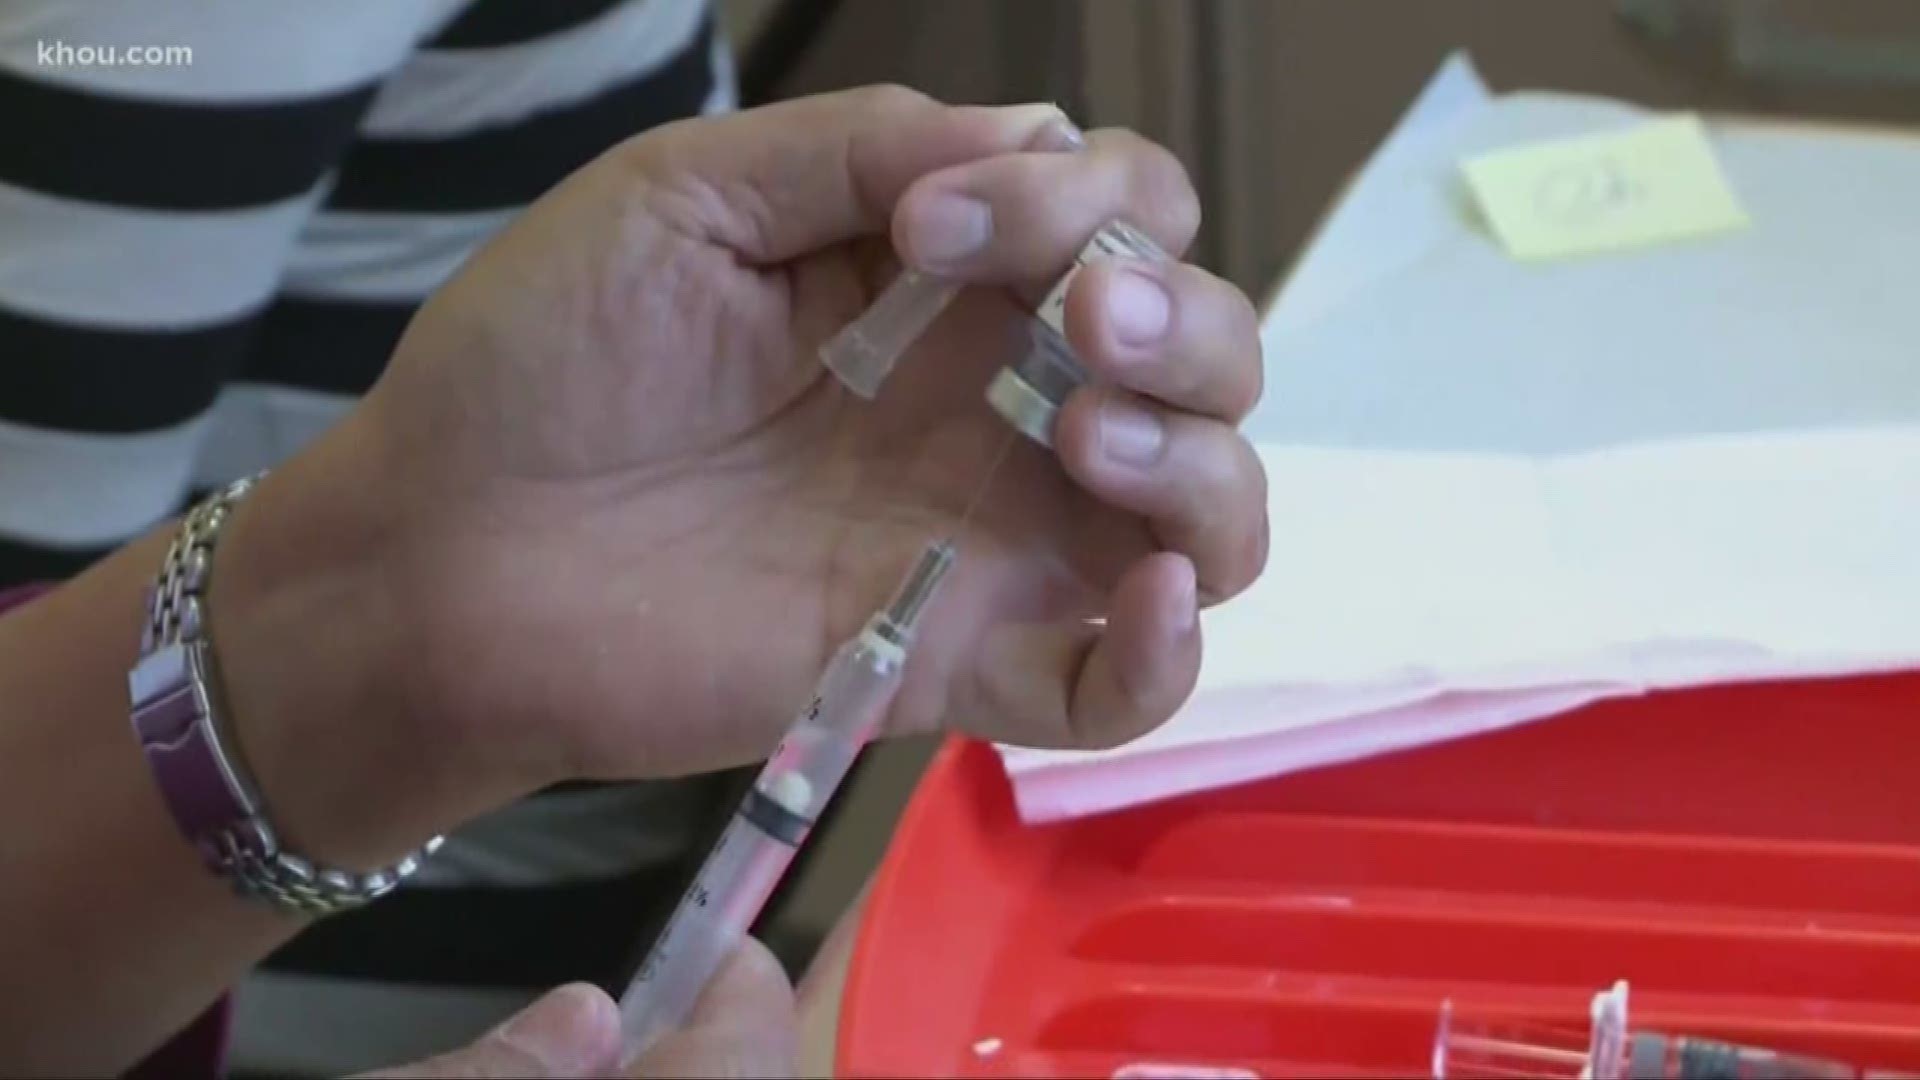 Medical experts say social media is helping to spread false information about vaccinations which has led to a surge in the number of children who are not being vaccinated.